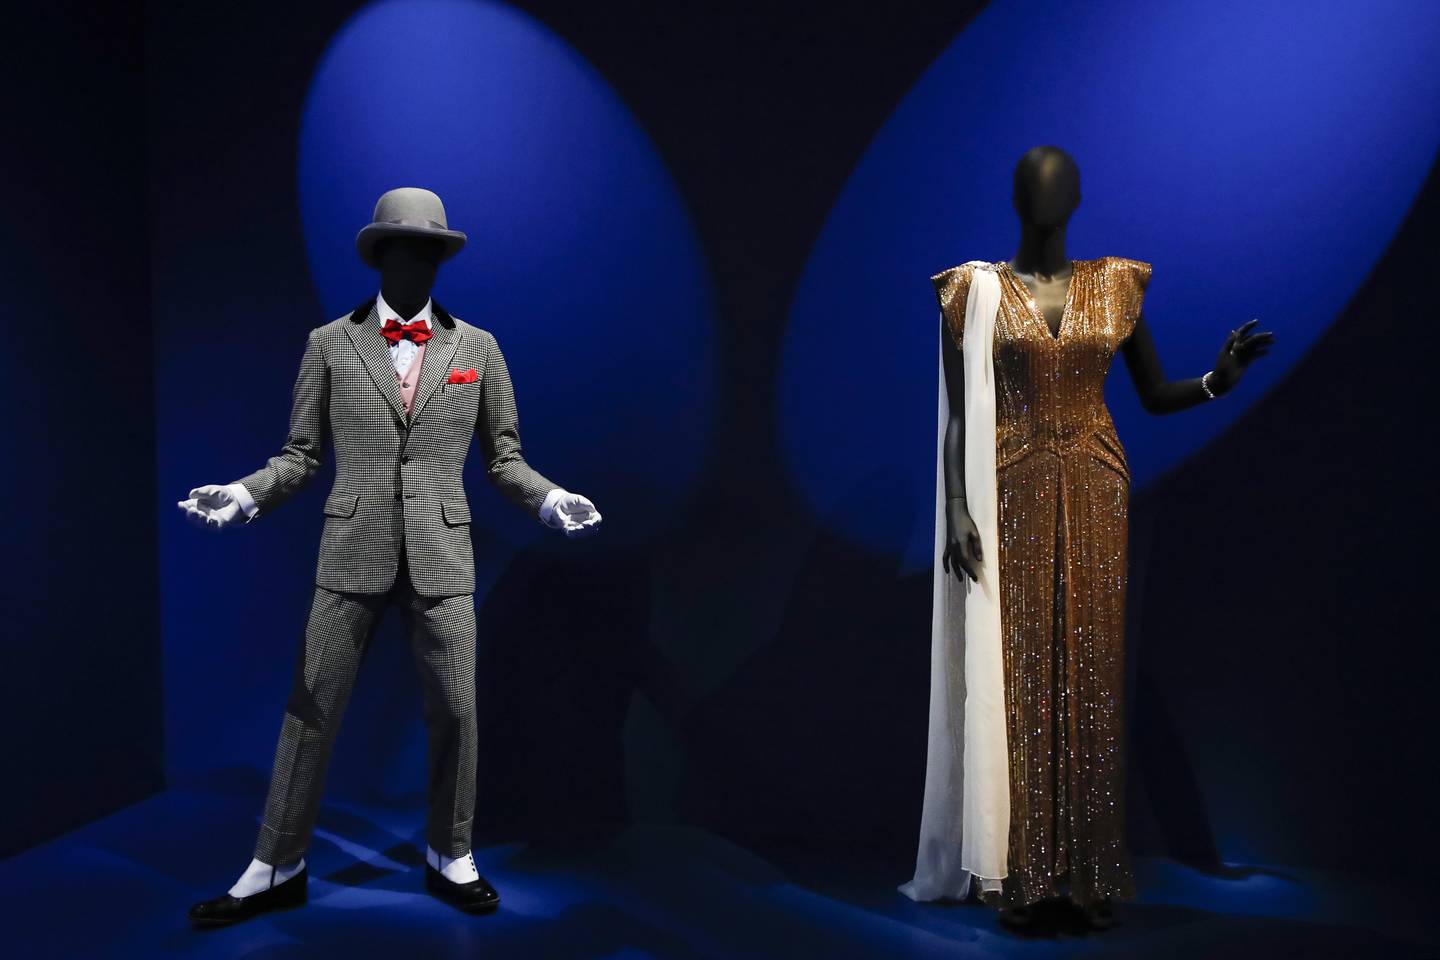 Left, a costume worn by Sammy Davis Jr in the film 'Porgy and Bess'; right, a costume worn by Lena Horne in the film 'Stormy Weather'. EPA